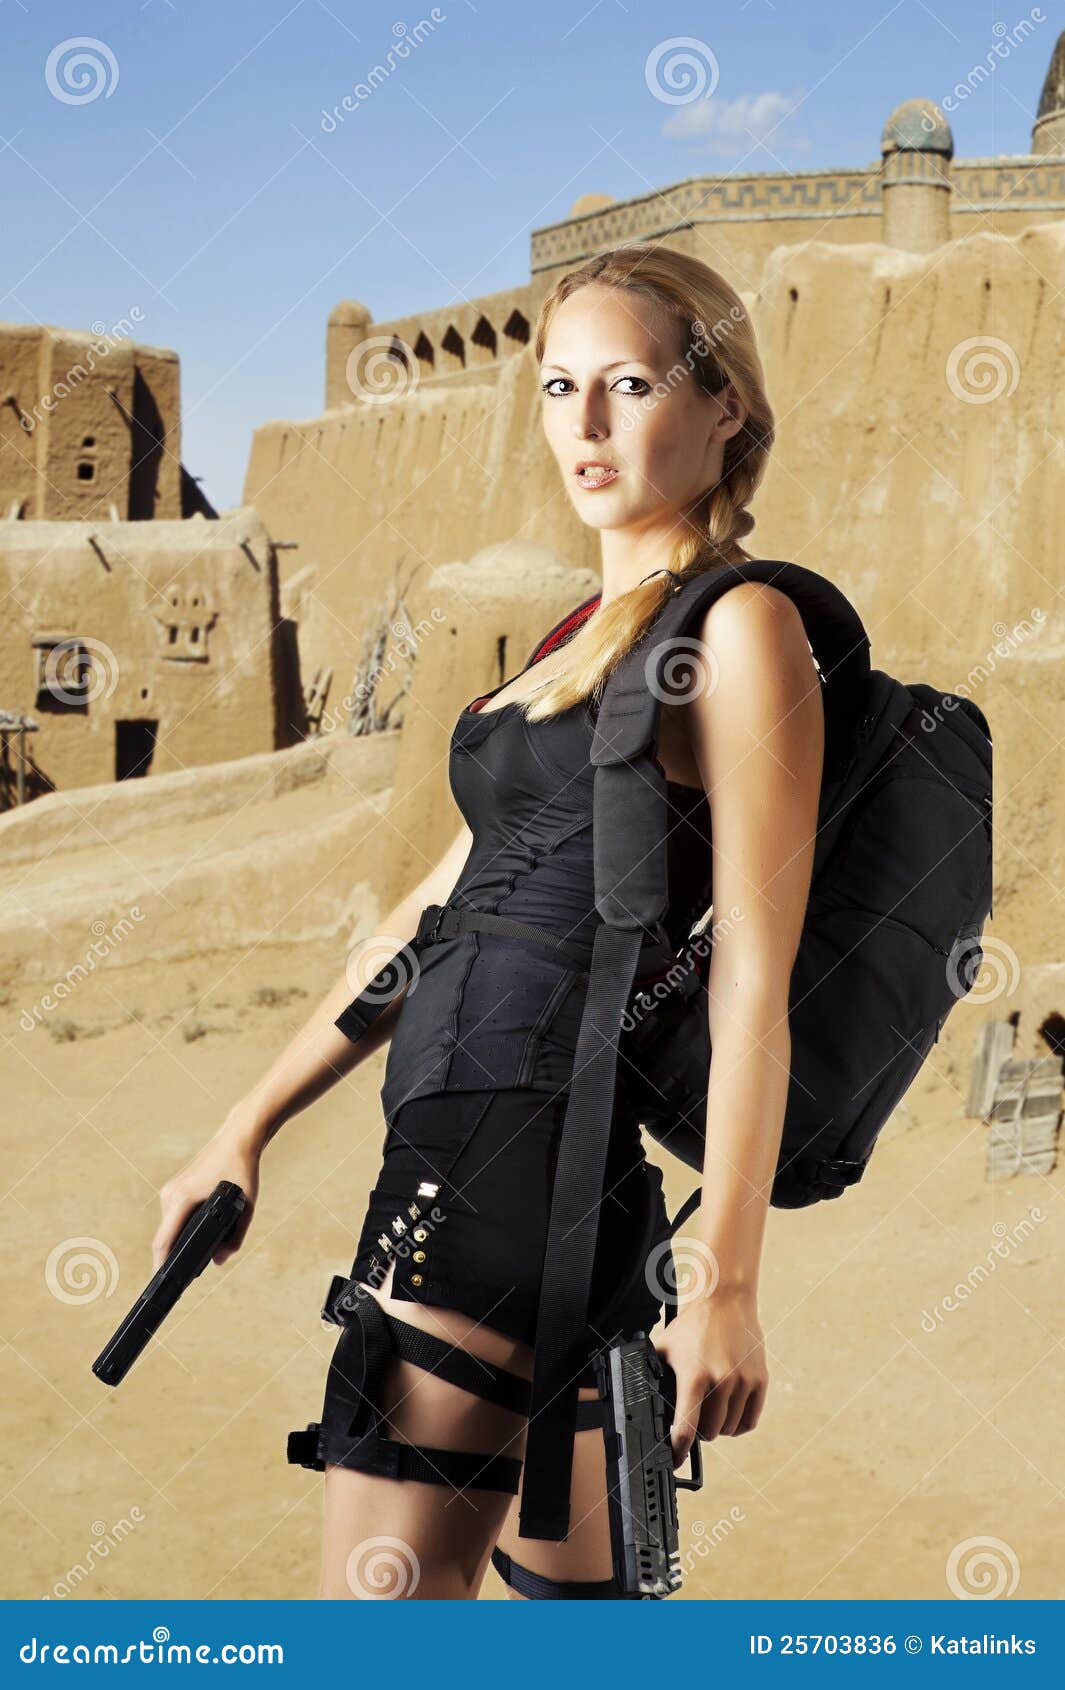 Female Model With Two Hand Guns Stock Photo - Image: 25703836